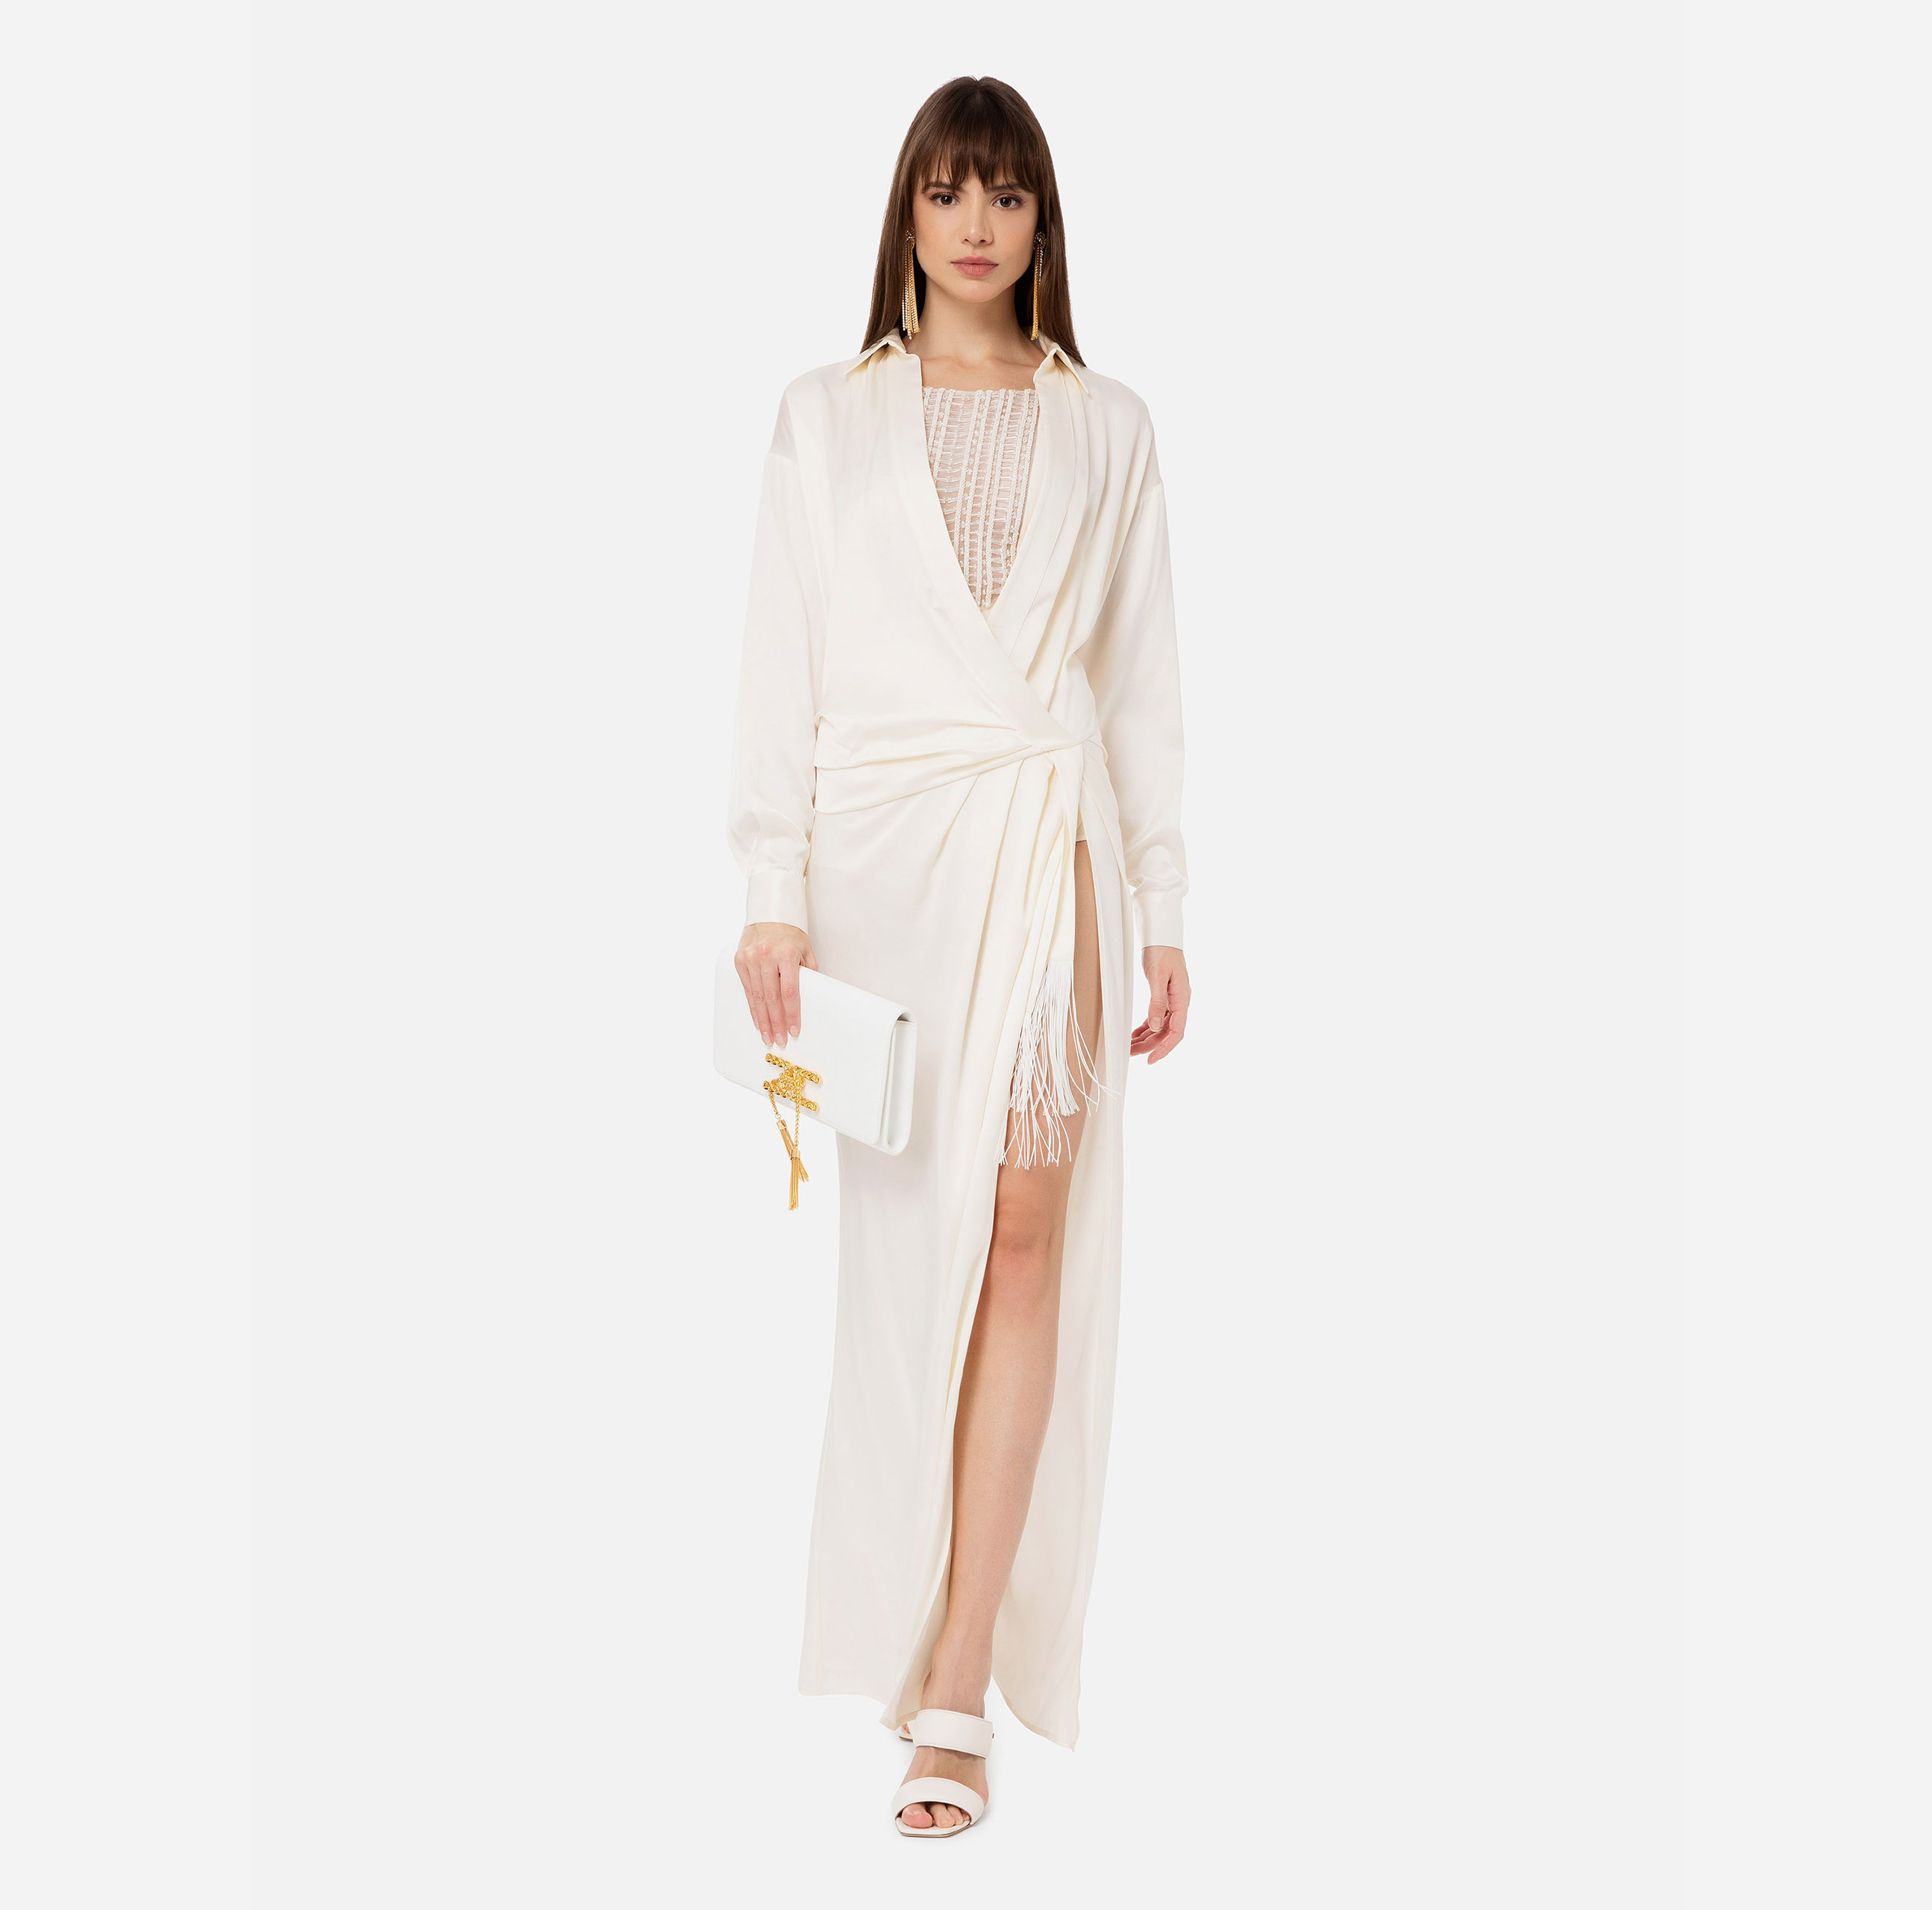 Red carpet silk dress with embroidered body - Elisabetta Franchi